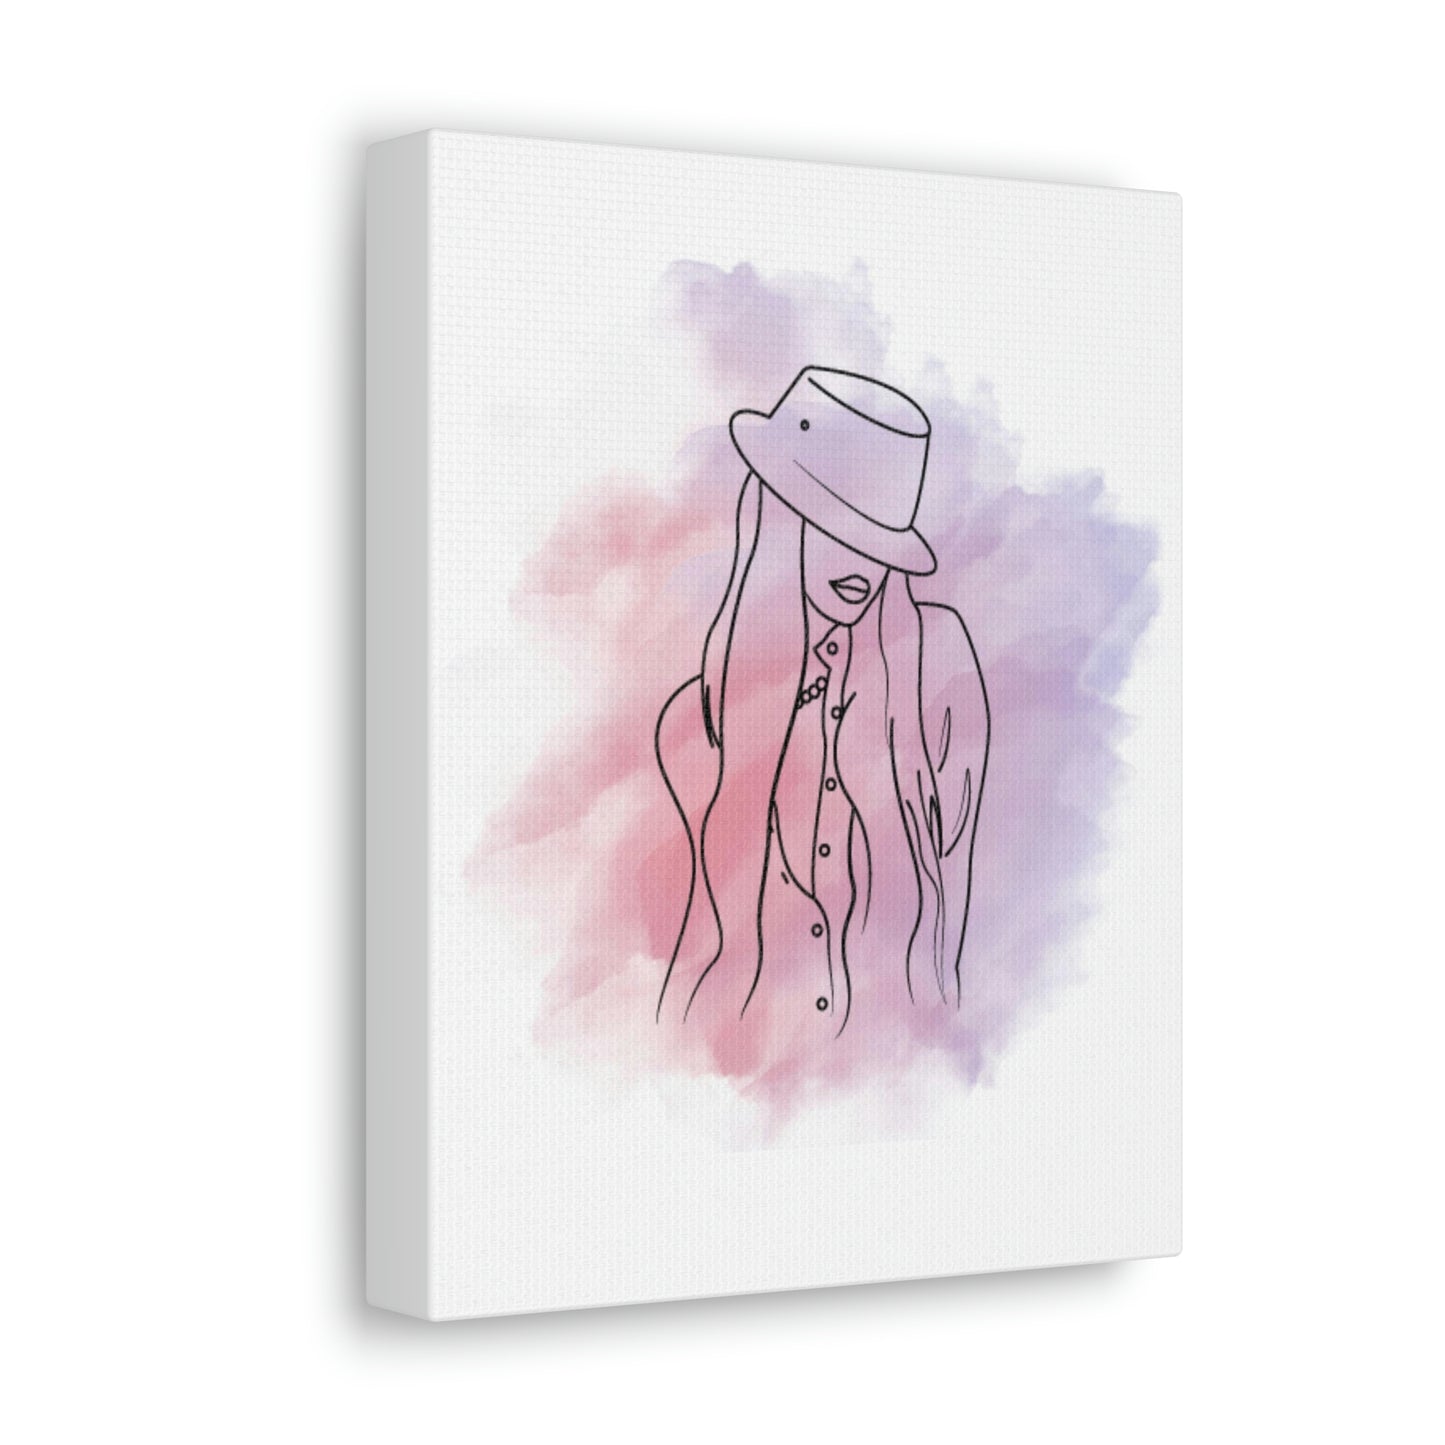 8 X 10 "Sassy Girl" Wrapped Canvas Wall Art - No Frame Needed